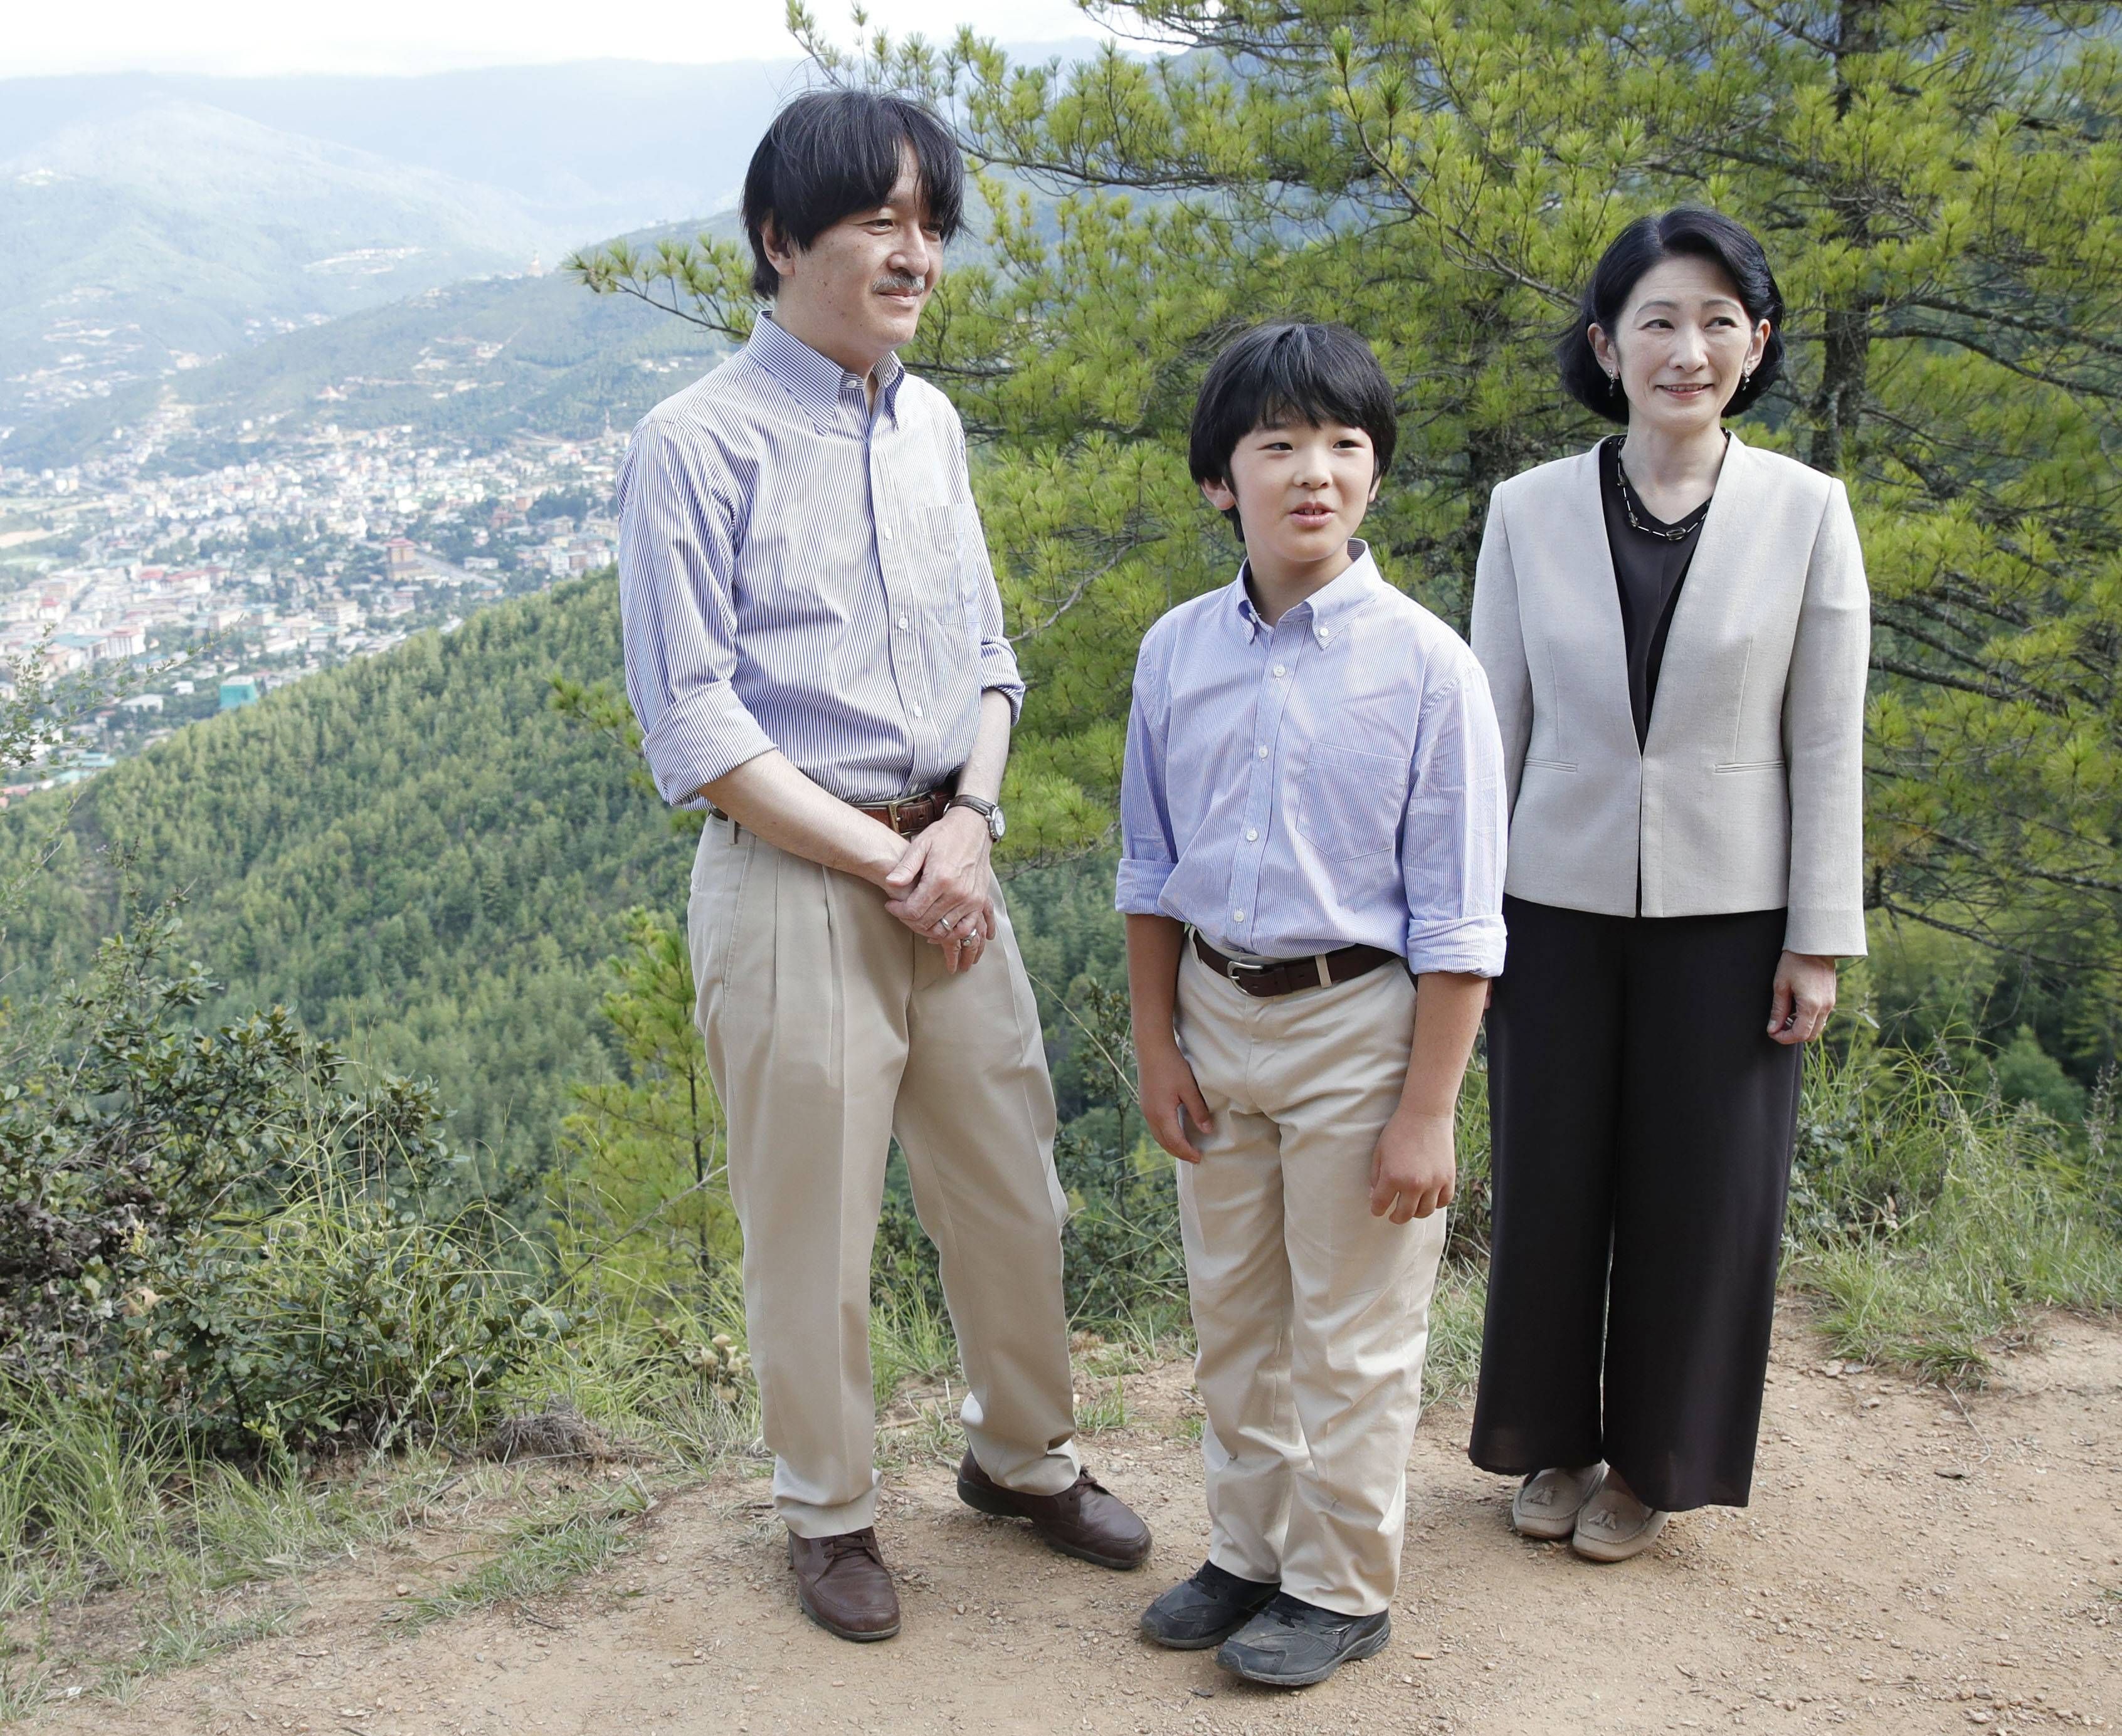 Japanese crown prince s family in Bhutan Japanese Prince Hisahito (C) and his parents Crown Prince Fumihito and Crown Princess Kiko pose for a photo on a hiking trail in Thimphu, the capital of Bhutan, on Aug. 20, 2019. 